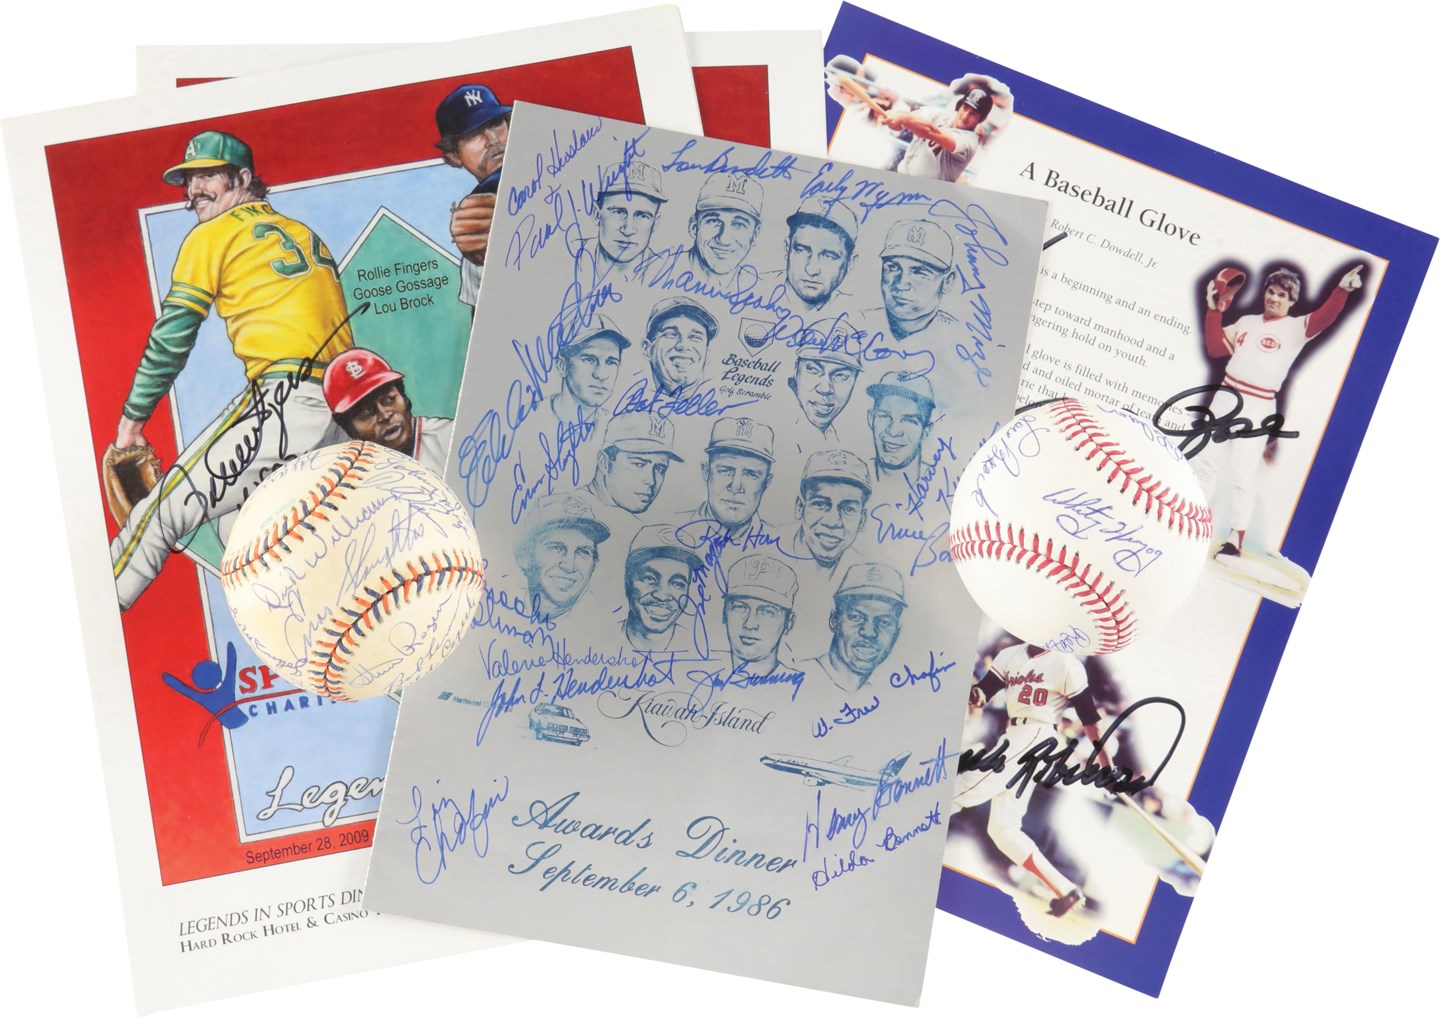 Baseball Autographs - Hall of Famers Signed Items w/ Balls and Programs (6)